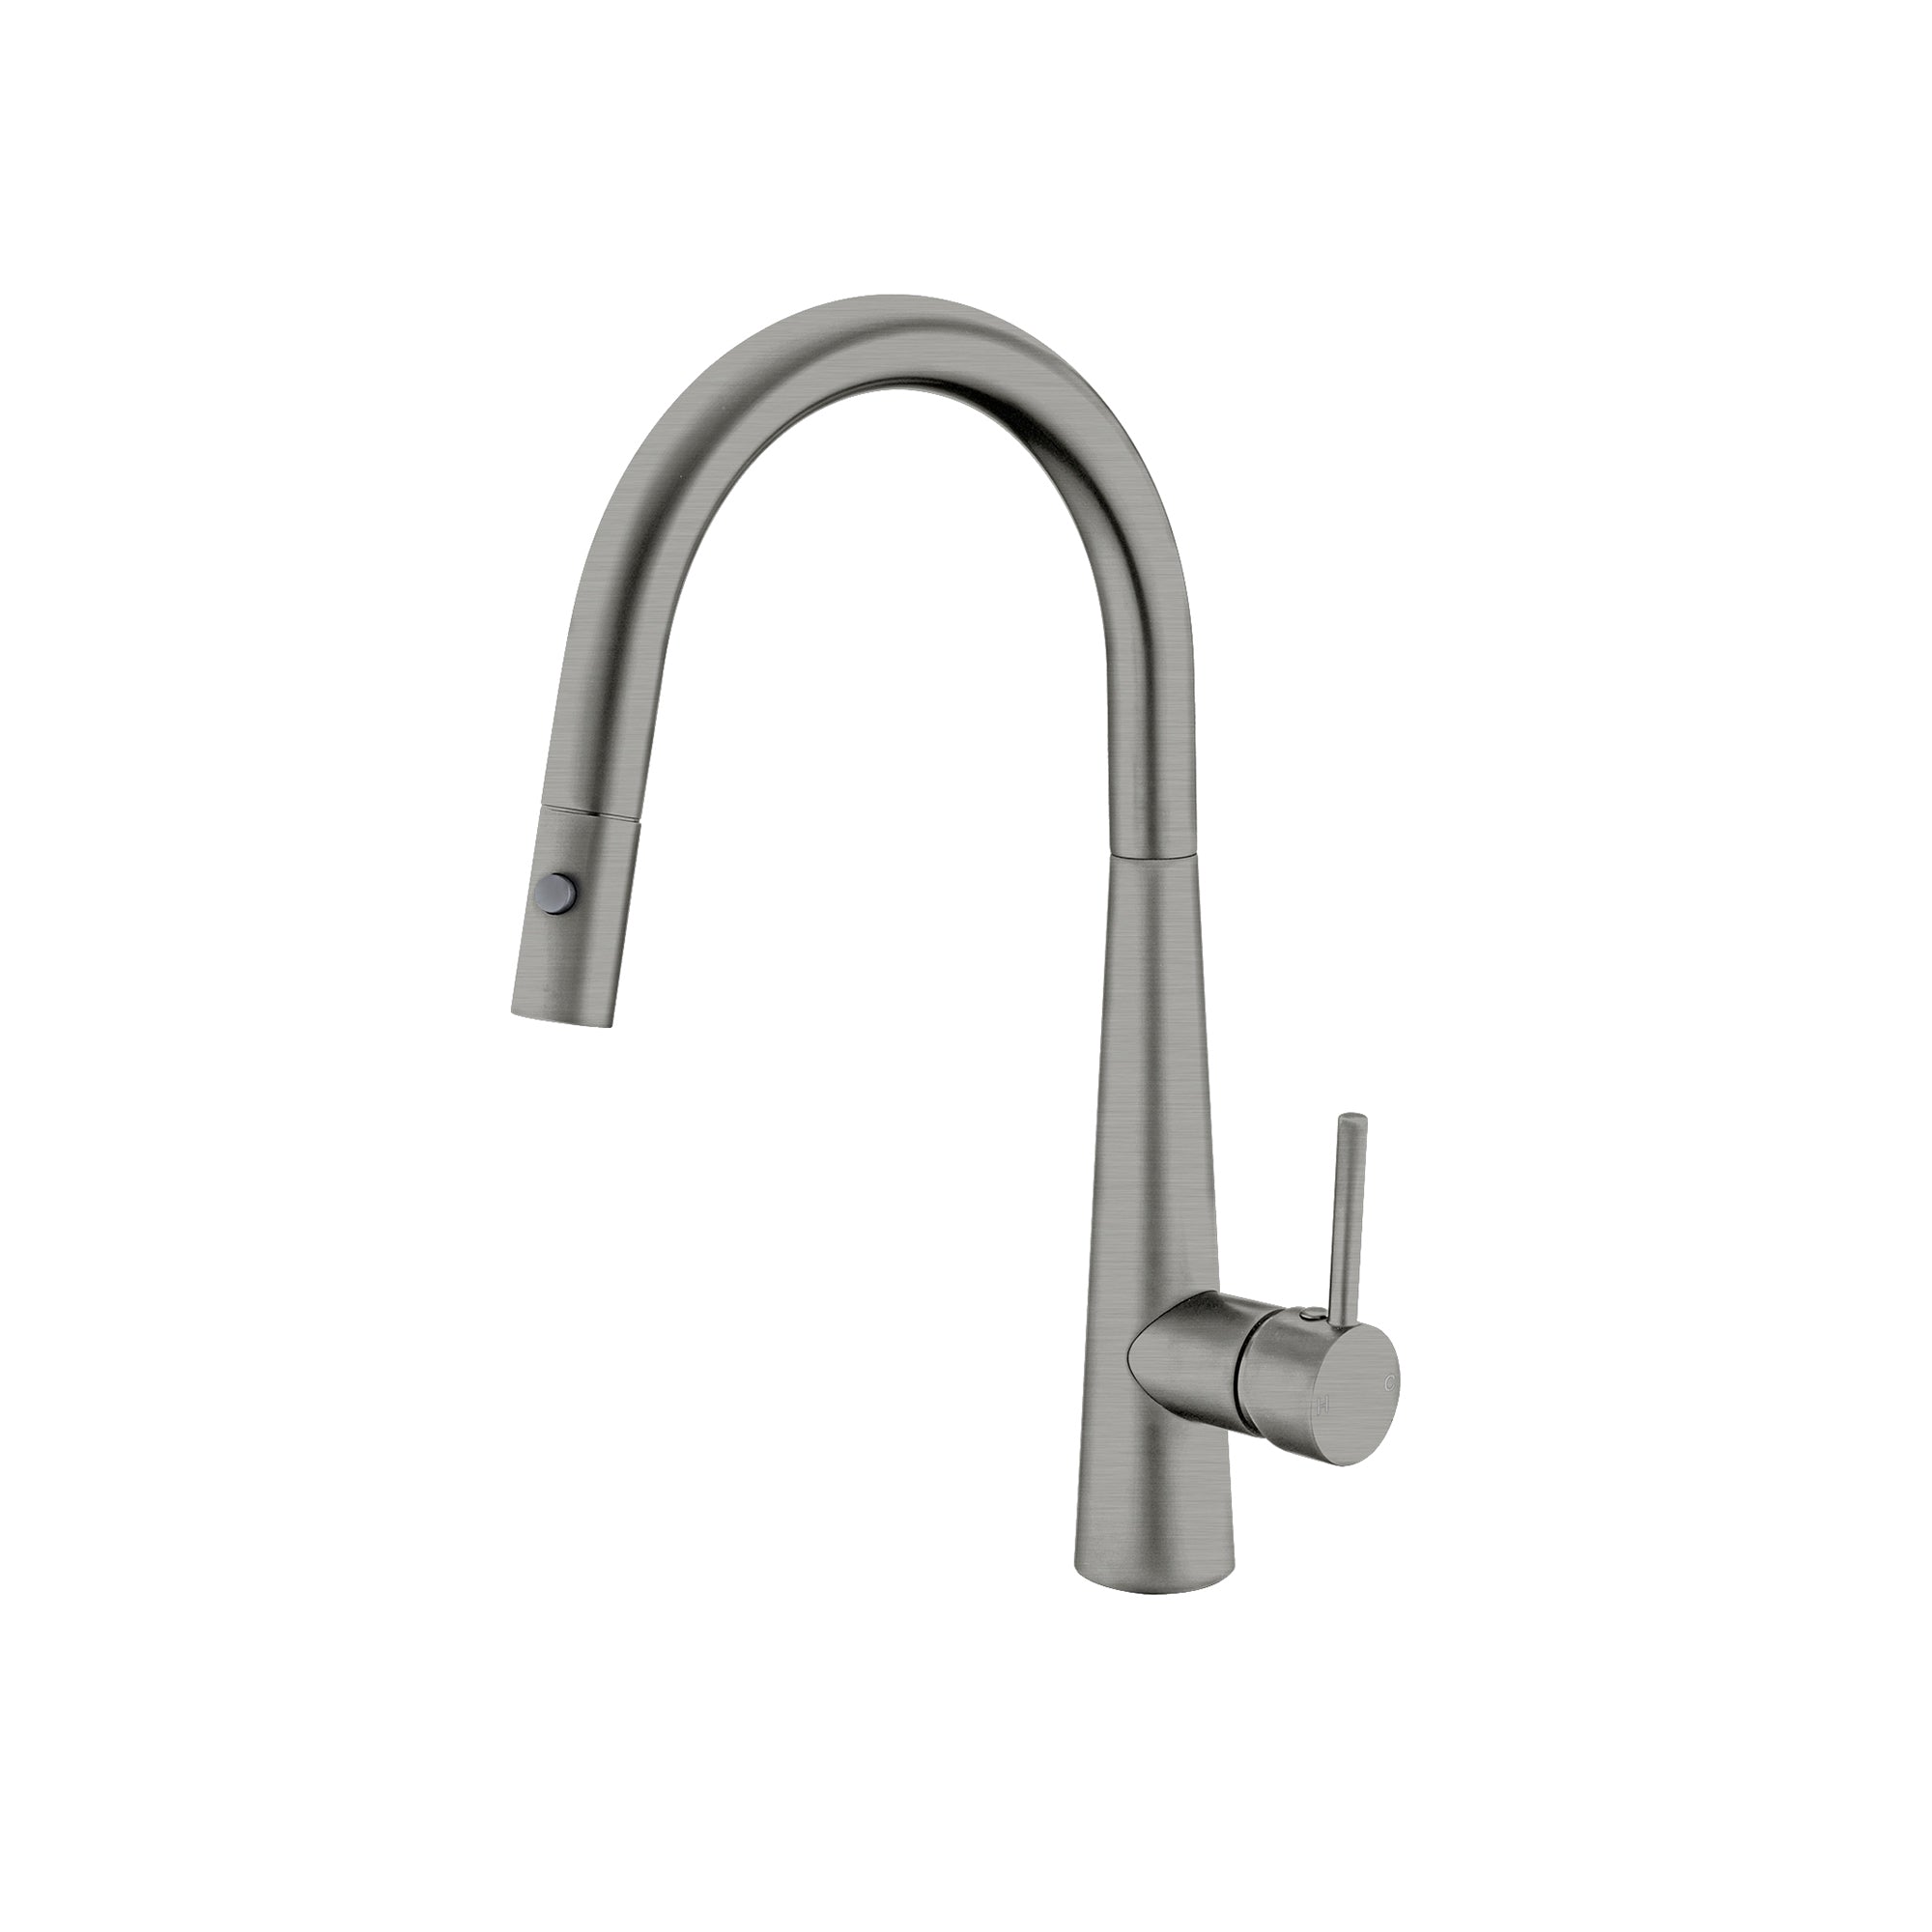 Dolce Pull Out Sink Mixer With Vegie Spray Function Gun Metal - NR581009cGM